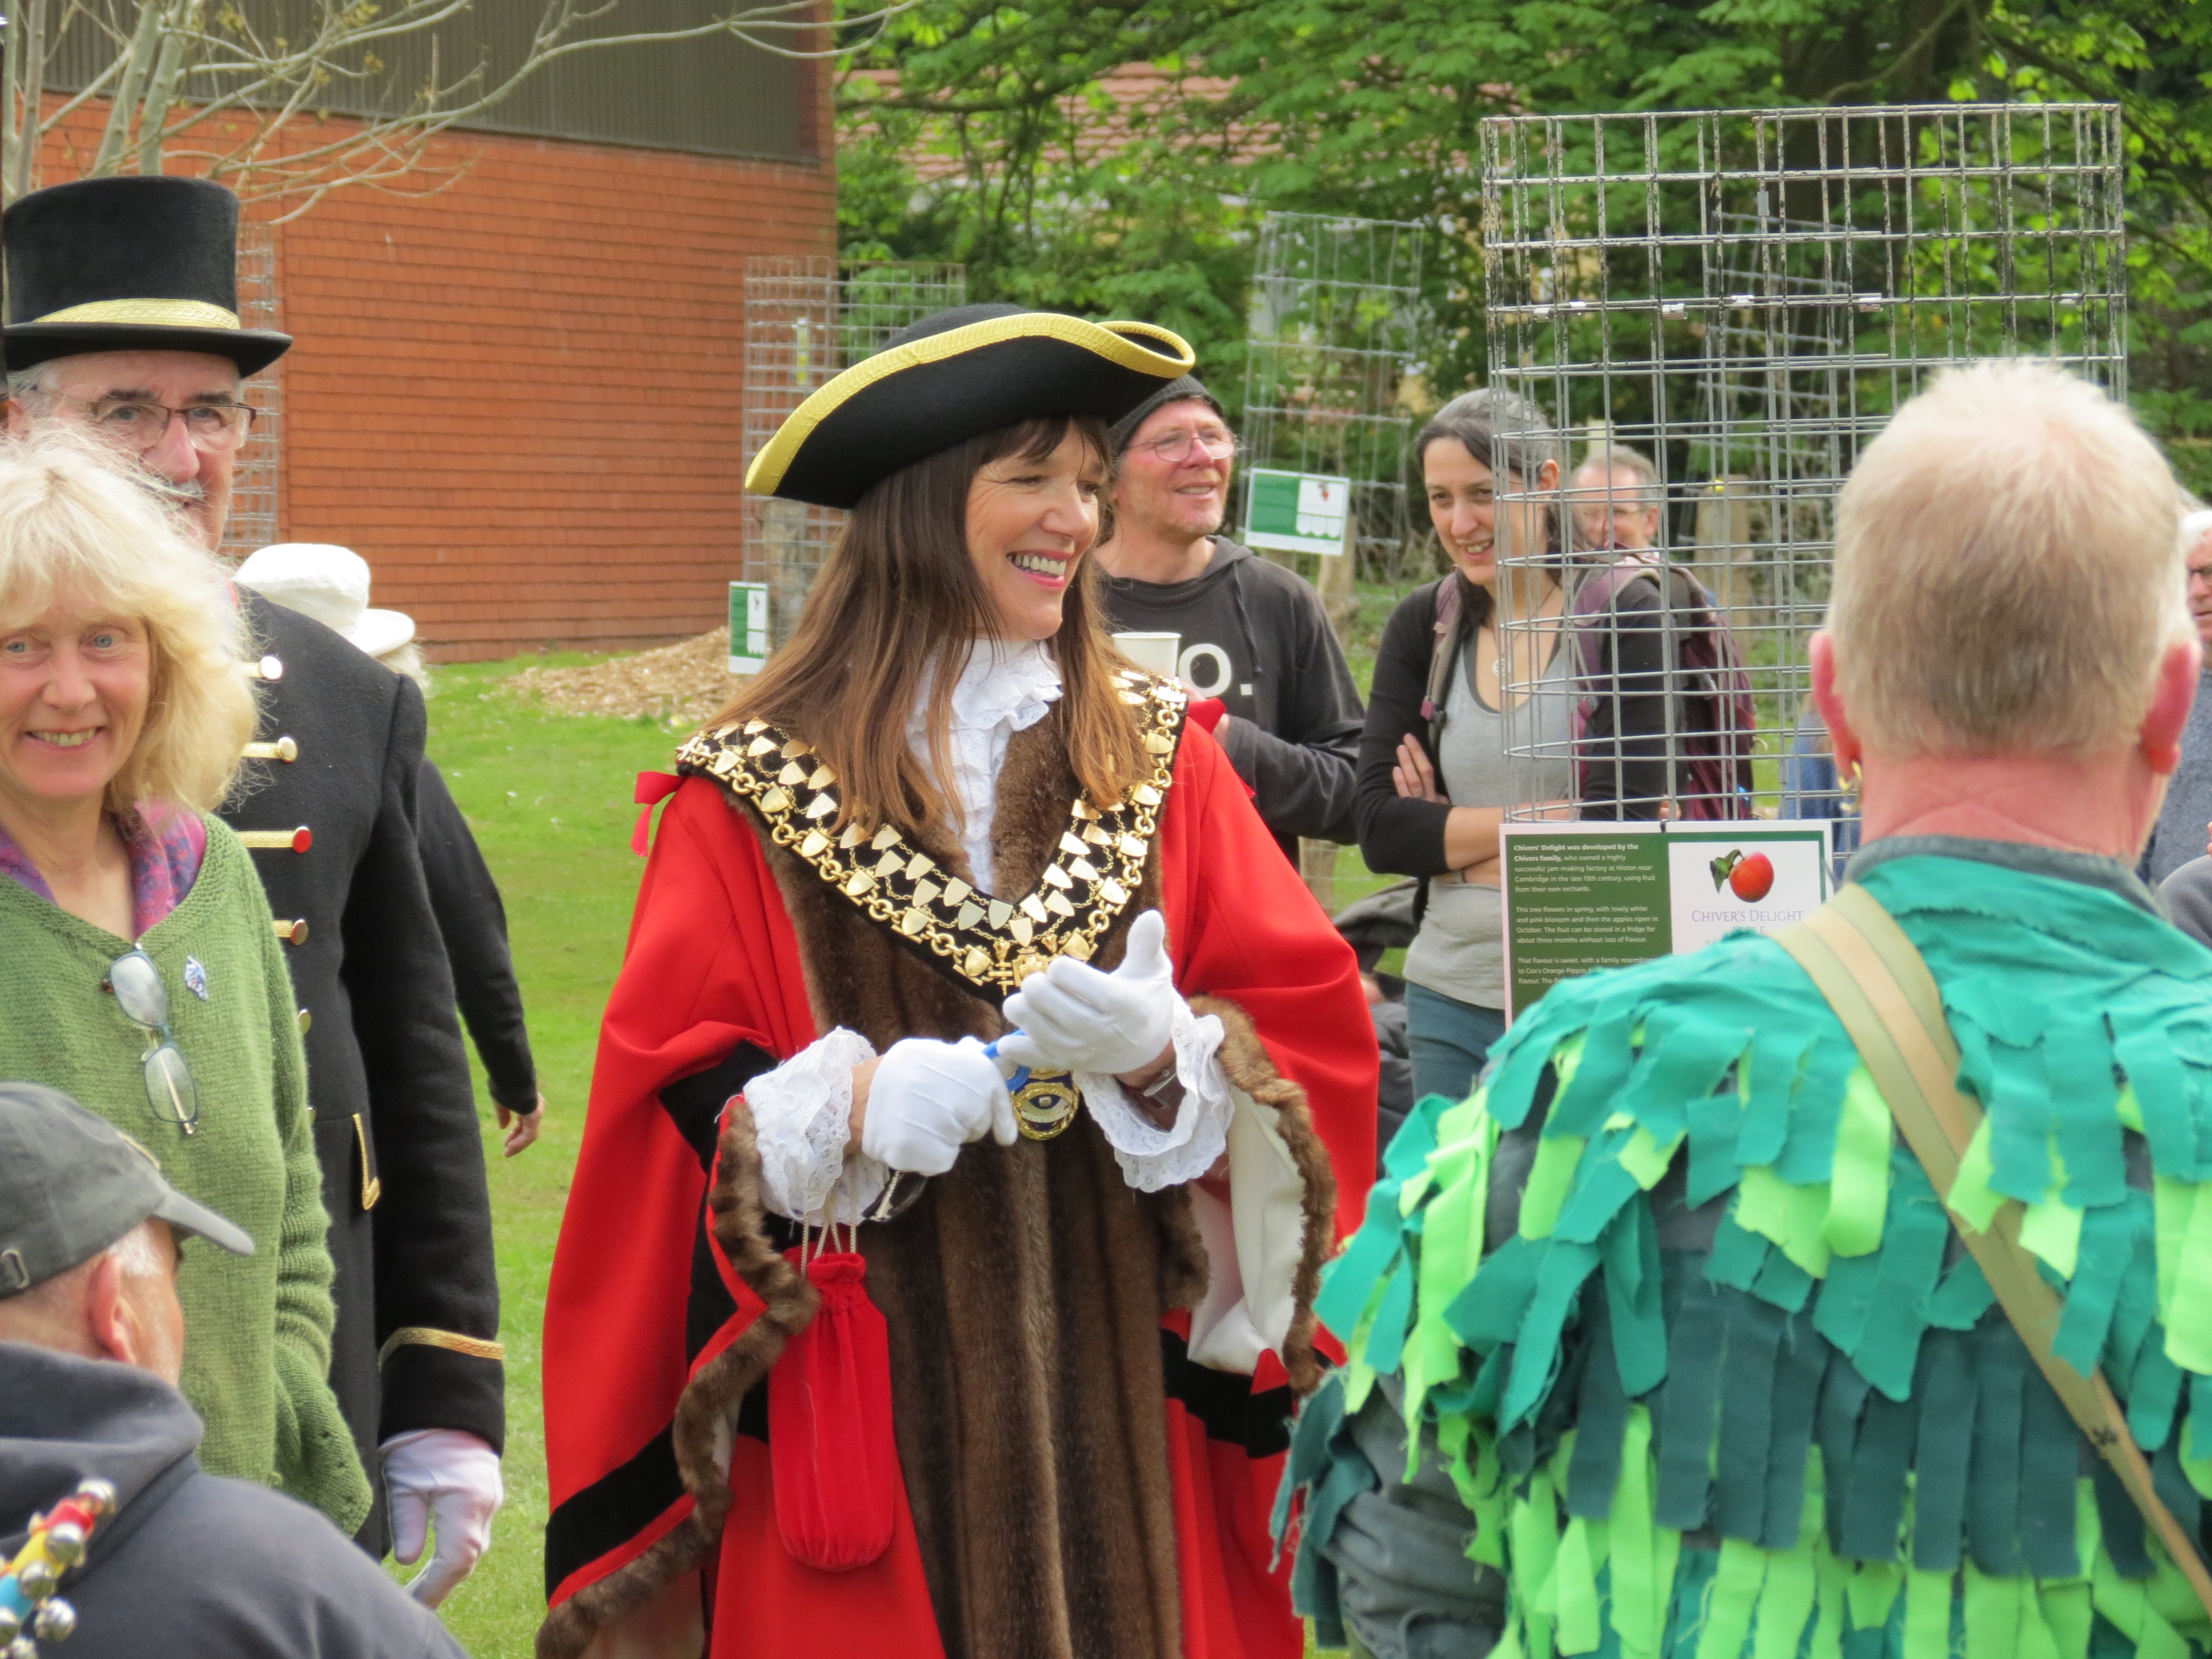 Tiverton Town Mayor, Cllr Susie Griggs, joined the wassail.